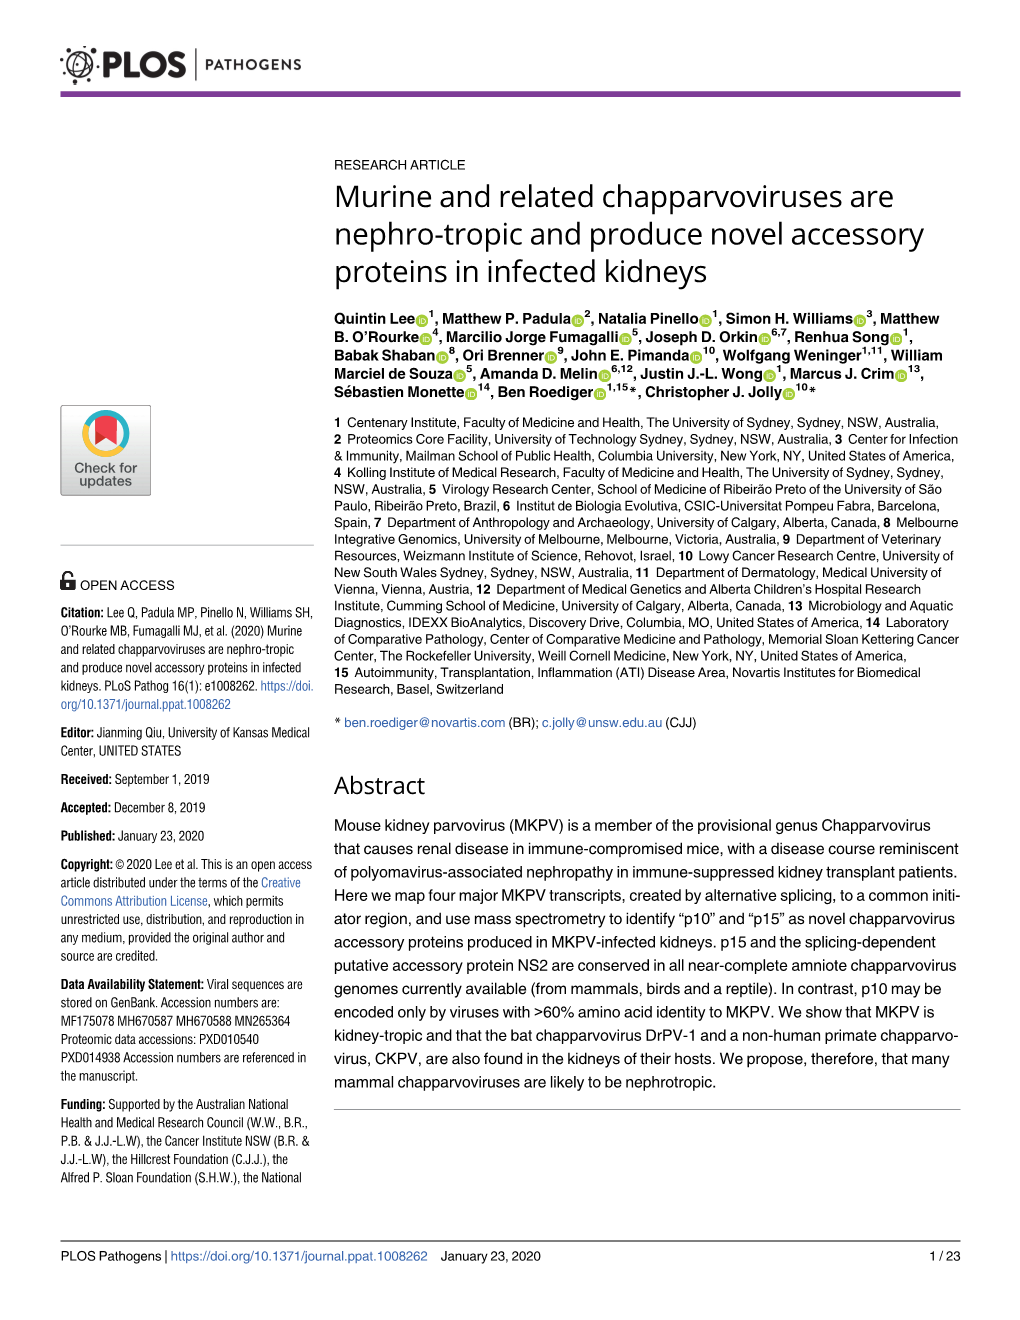 Murine and Related Chapparvoviruses Are Nephro-Tropic and Produce Novel Accessory Proteins in Infected Kidneys